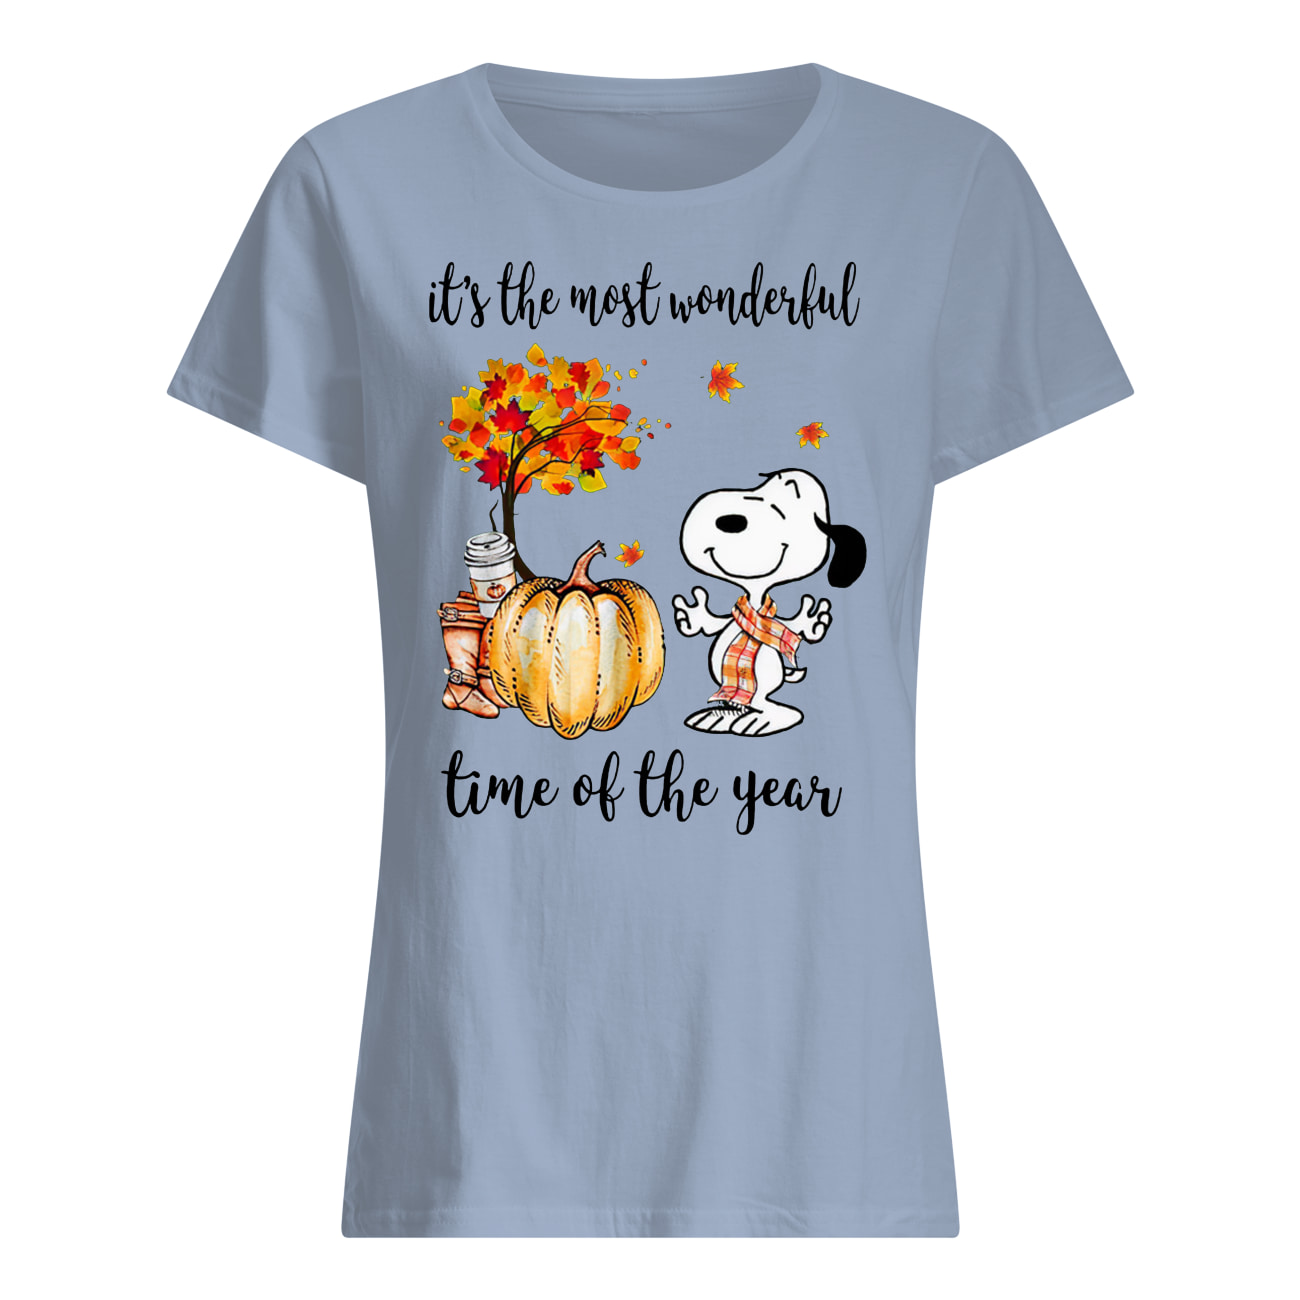 Snoopy it’s the most wonderful time of the year women's shirt